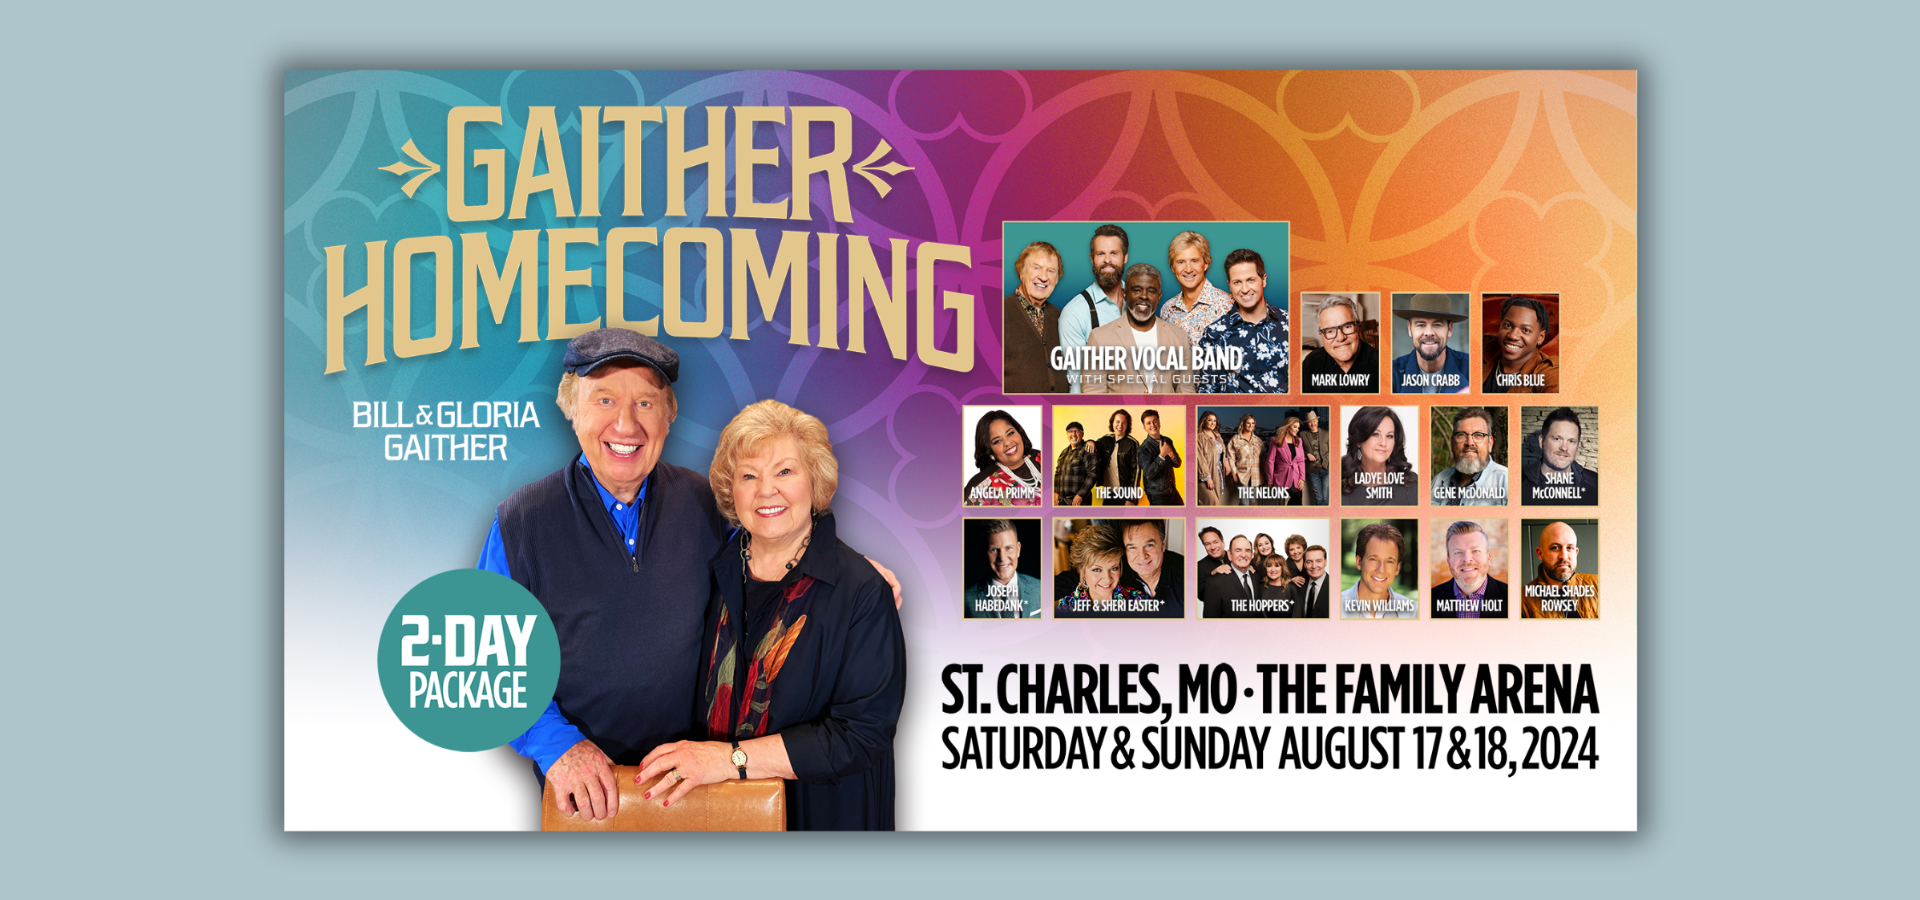 Bill & Gloria Gaither Present Two-Day Gaither Homecoming Spectacular